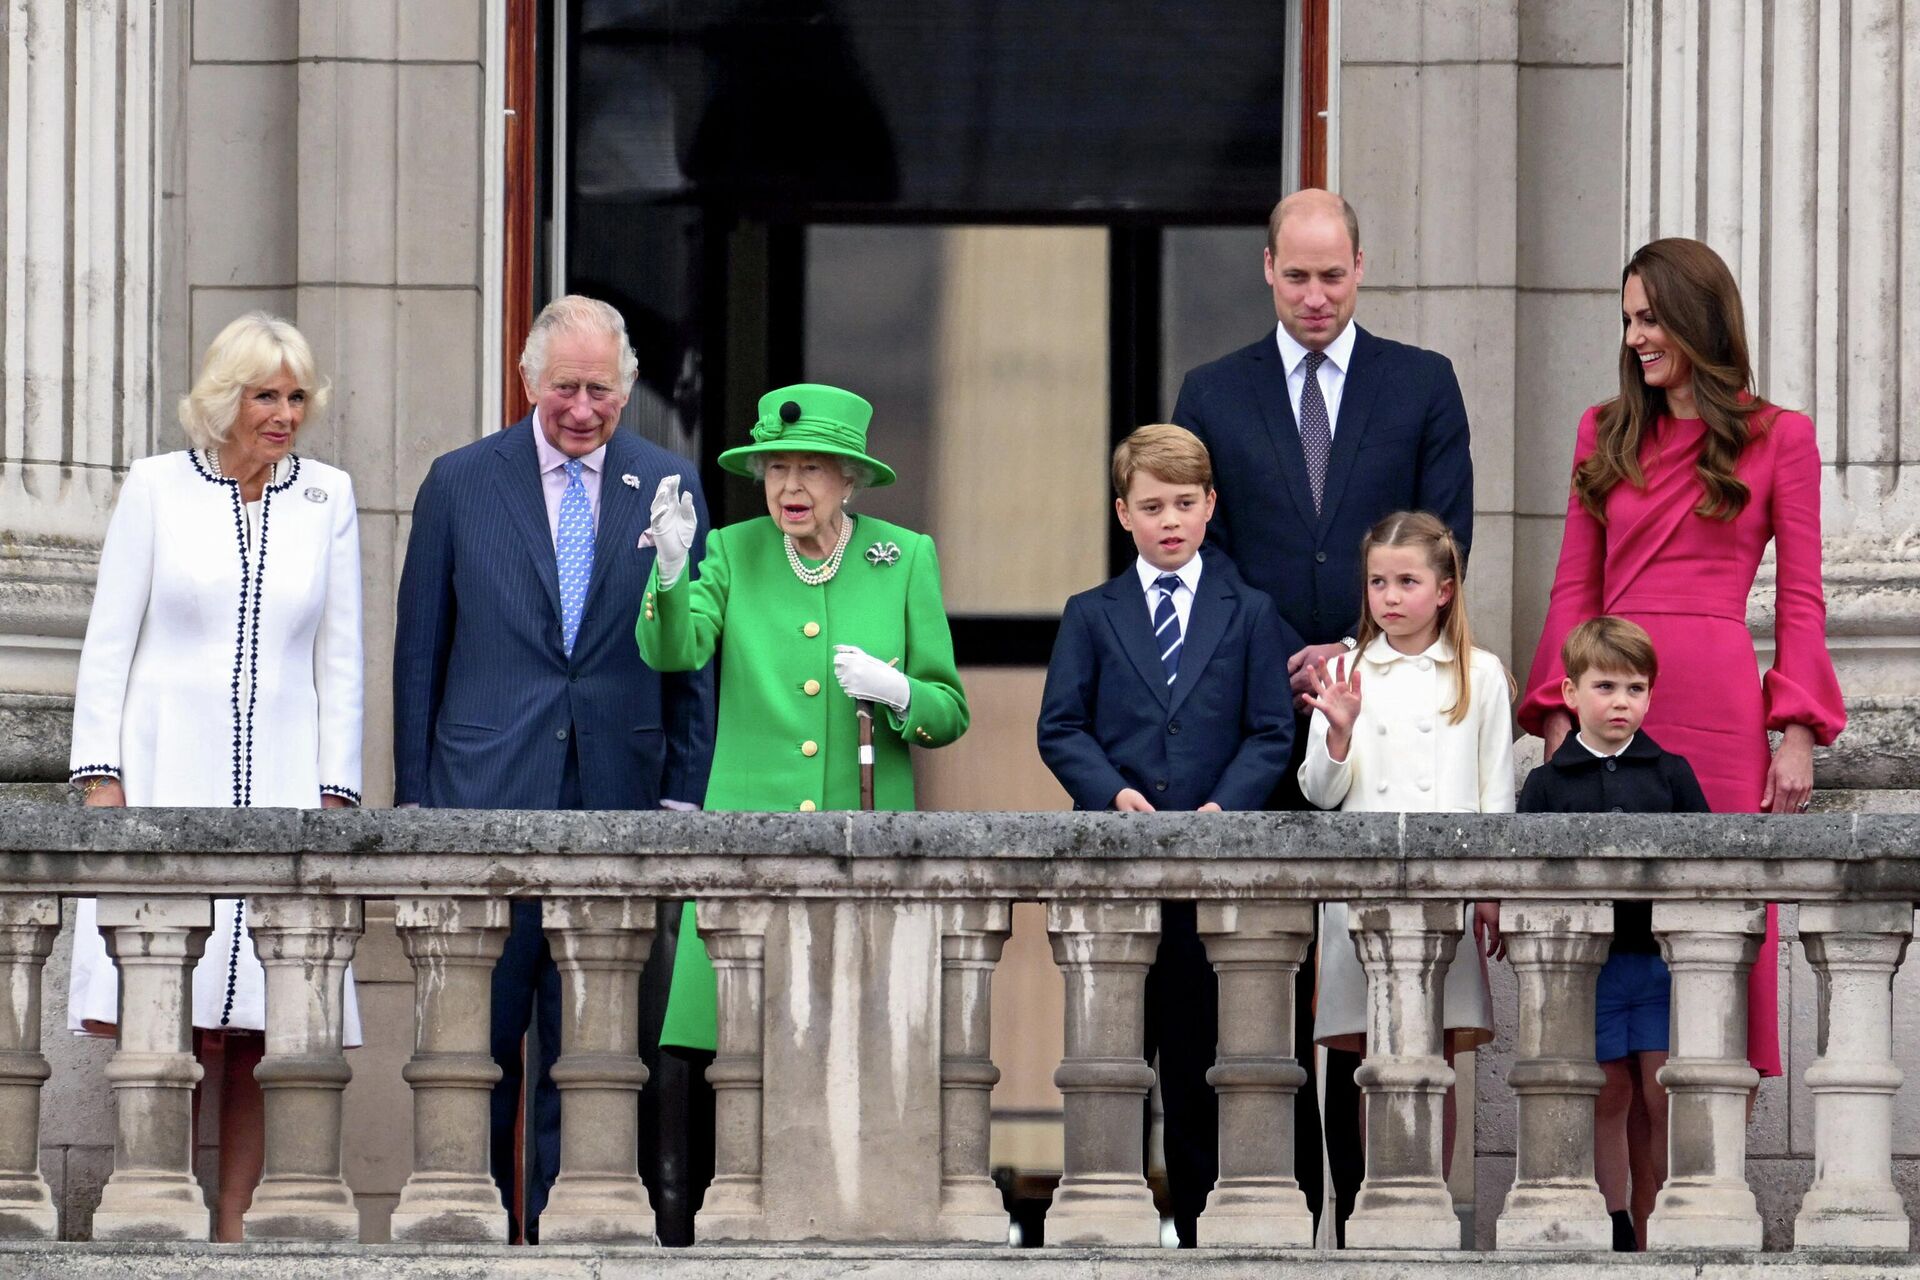 Britain's Queen Elizabeth II (3rd L) stands on Buckingham Palace balcony with (From L) Britain's Camilla, Duchess of Cornwall, Britain's Prince Charles, Prince of Wales, Britain's Prince George of Cambridge, Britain's Prince William, Duke of Cambridge, Britain's Princess Charlotte of Cambridge, Britain's Catherine, Duchess of Cambridge, and Britain's Prince Louis of Cambridge at the end of the Platinum Pageant in London on June 5, 2022 as part of Queen Elizabeth II's platinum jubilee celebrations. - Sputnik International, 1920, 19.06.2022